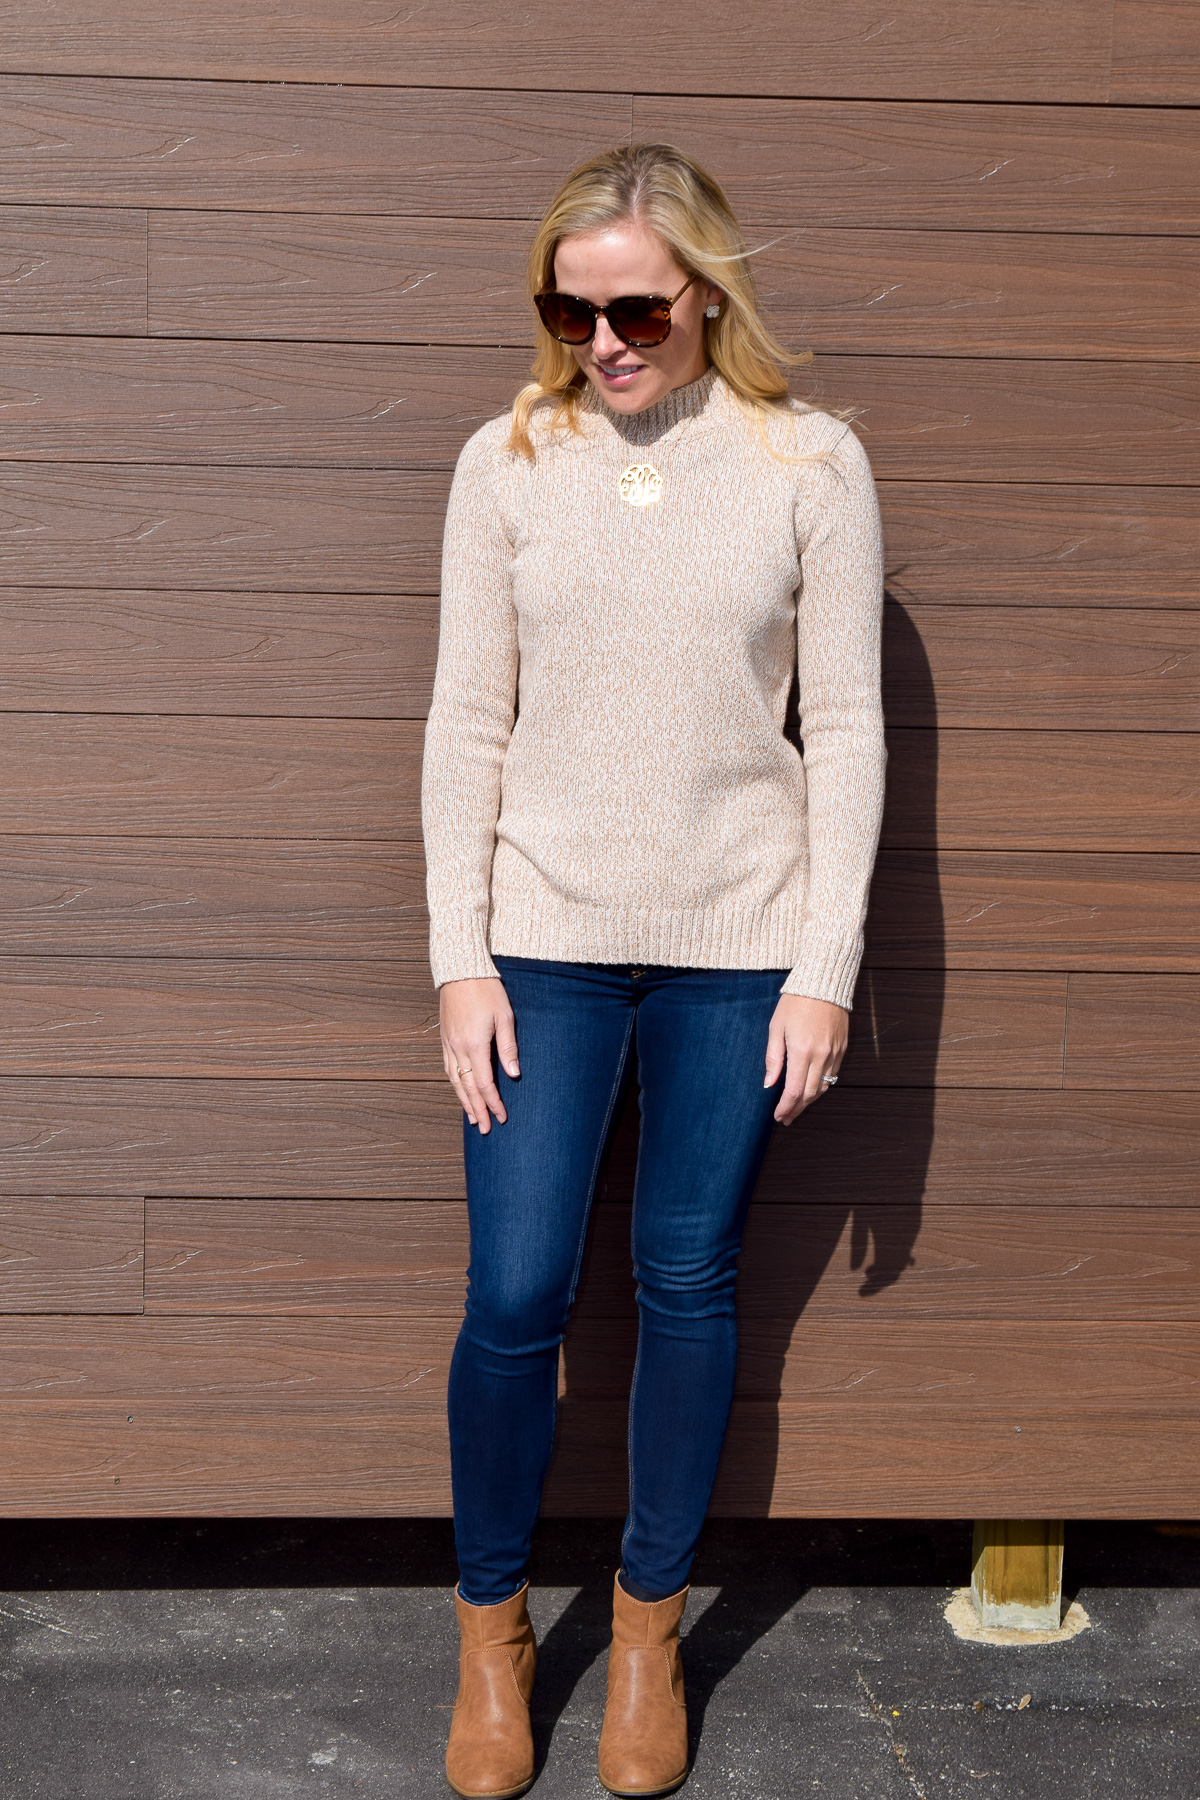 :: Everyday Sweater + Friday Favorites + Link Love ::